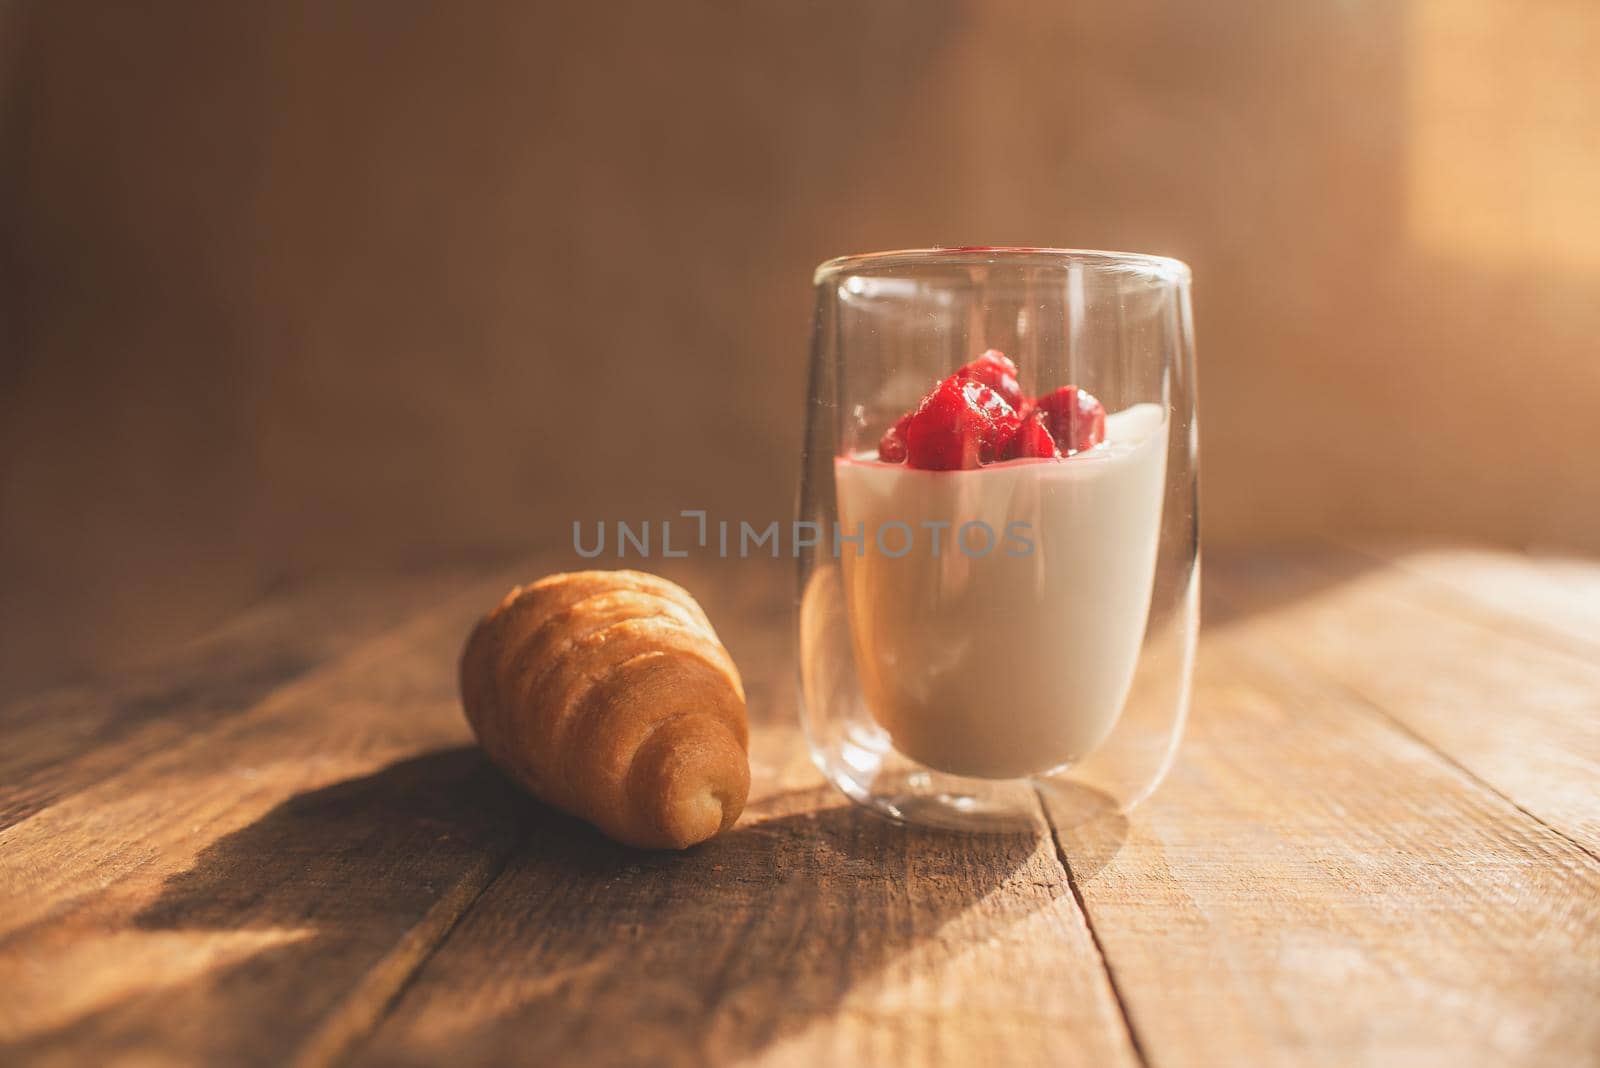 double glass with yogurt and berries and croissant on a wooden table where the bright sun is shining